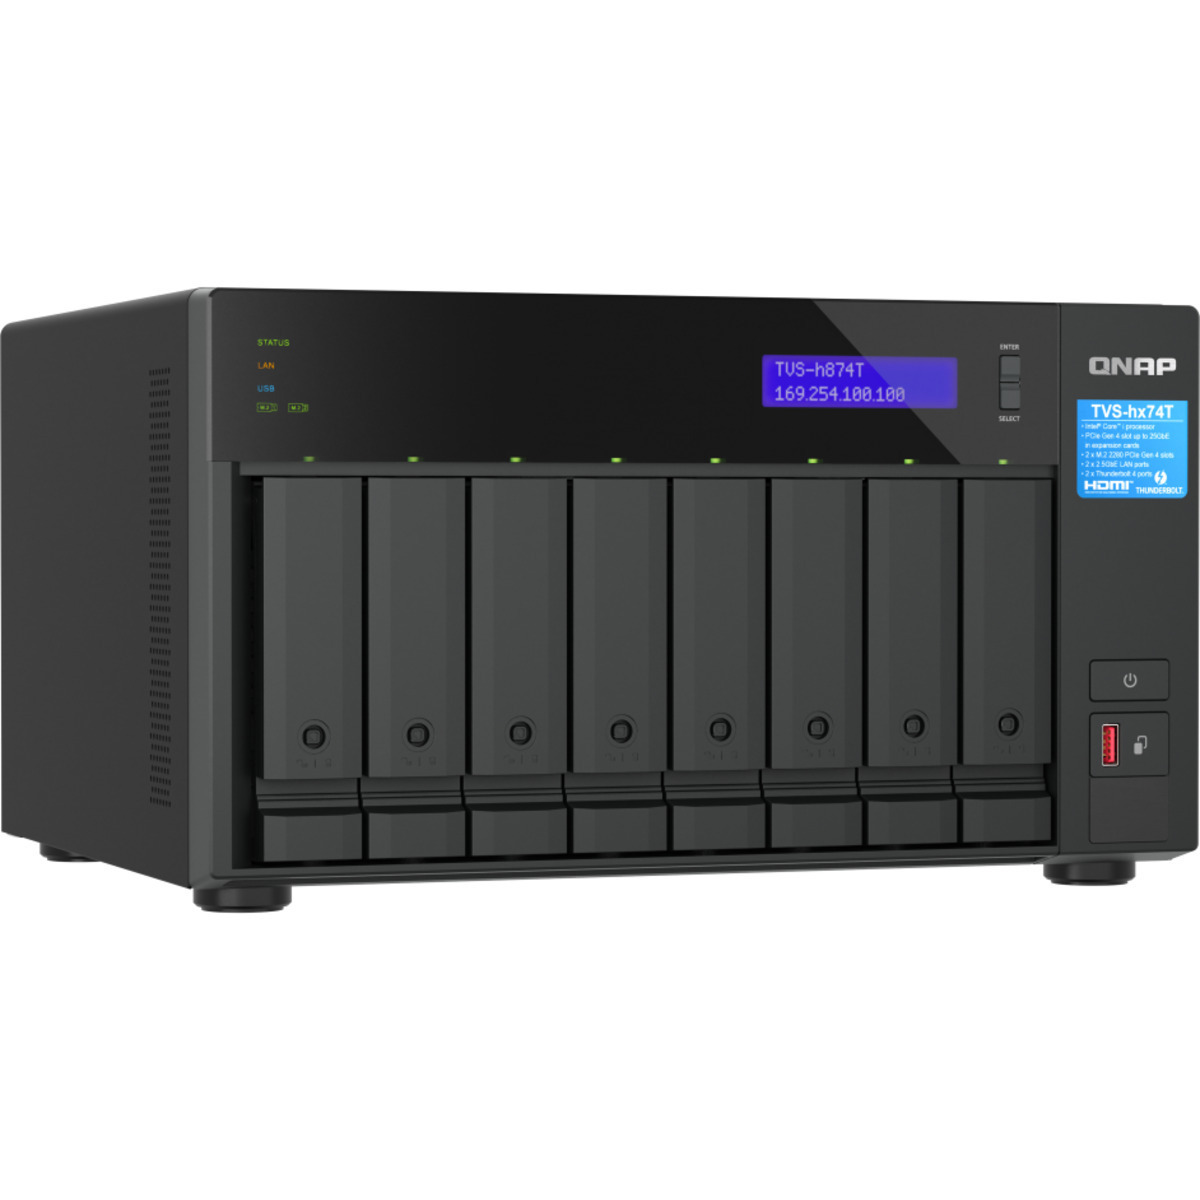 QNAP TVS-h874T-i9 DAS-NAS - Combo Direct + Network Storage Device Burn-In Tested Configurations